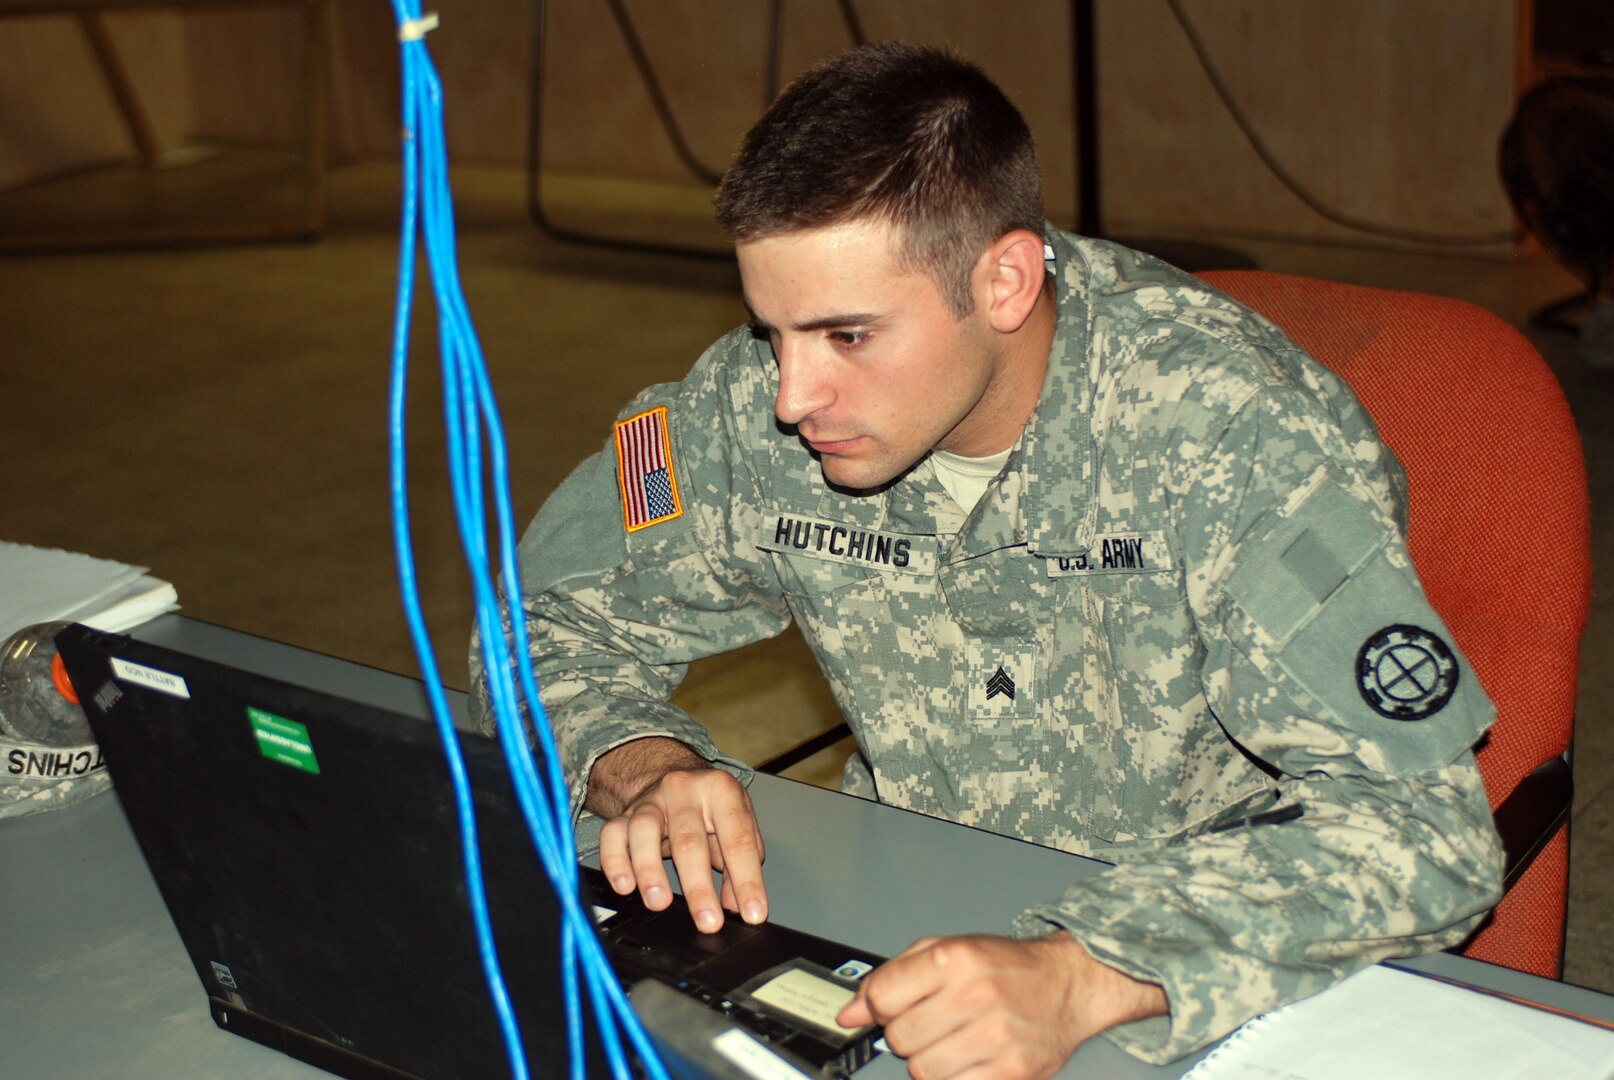 Missouri Army National Guard Sgt. Devlin Hutchins works on his computer serving as the S-3 operations noncommissioned officer during his two-week annual training mission in support of Beyond the Horizon 2012. Hutchins is a noncommissioned officer with the 1140th Engineer Battalion of the Missouri National Guard. U.S. Army South, in partnership with Honduras, is conducting various medical and civic action programs, providing focused humanitarian assistance